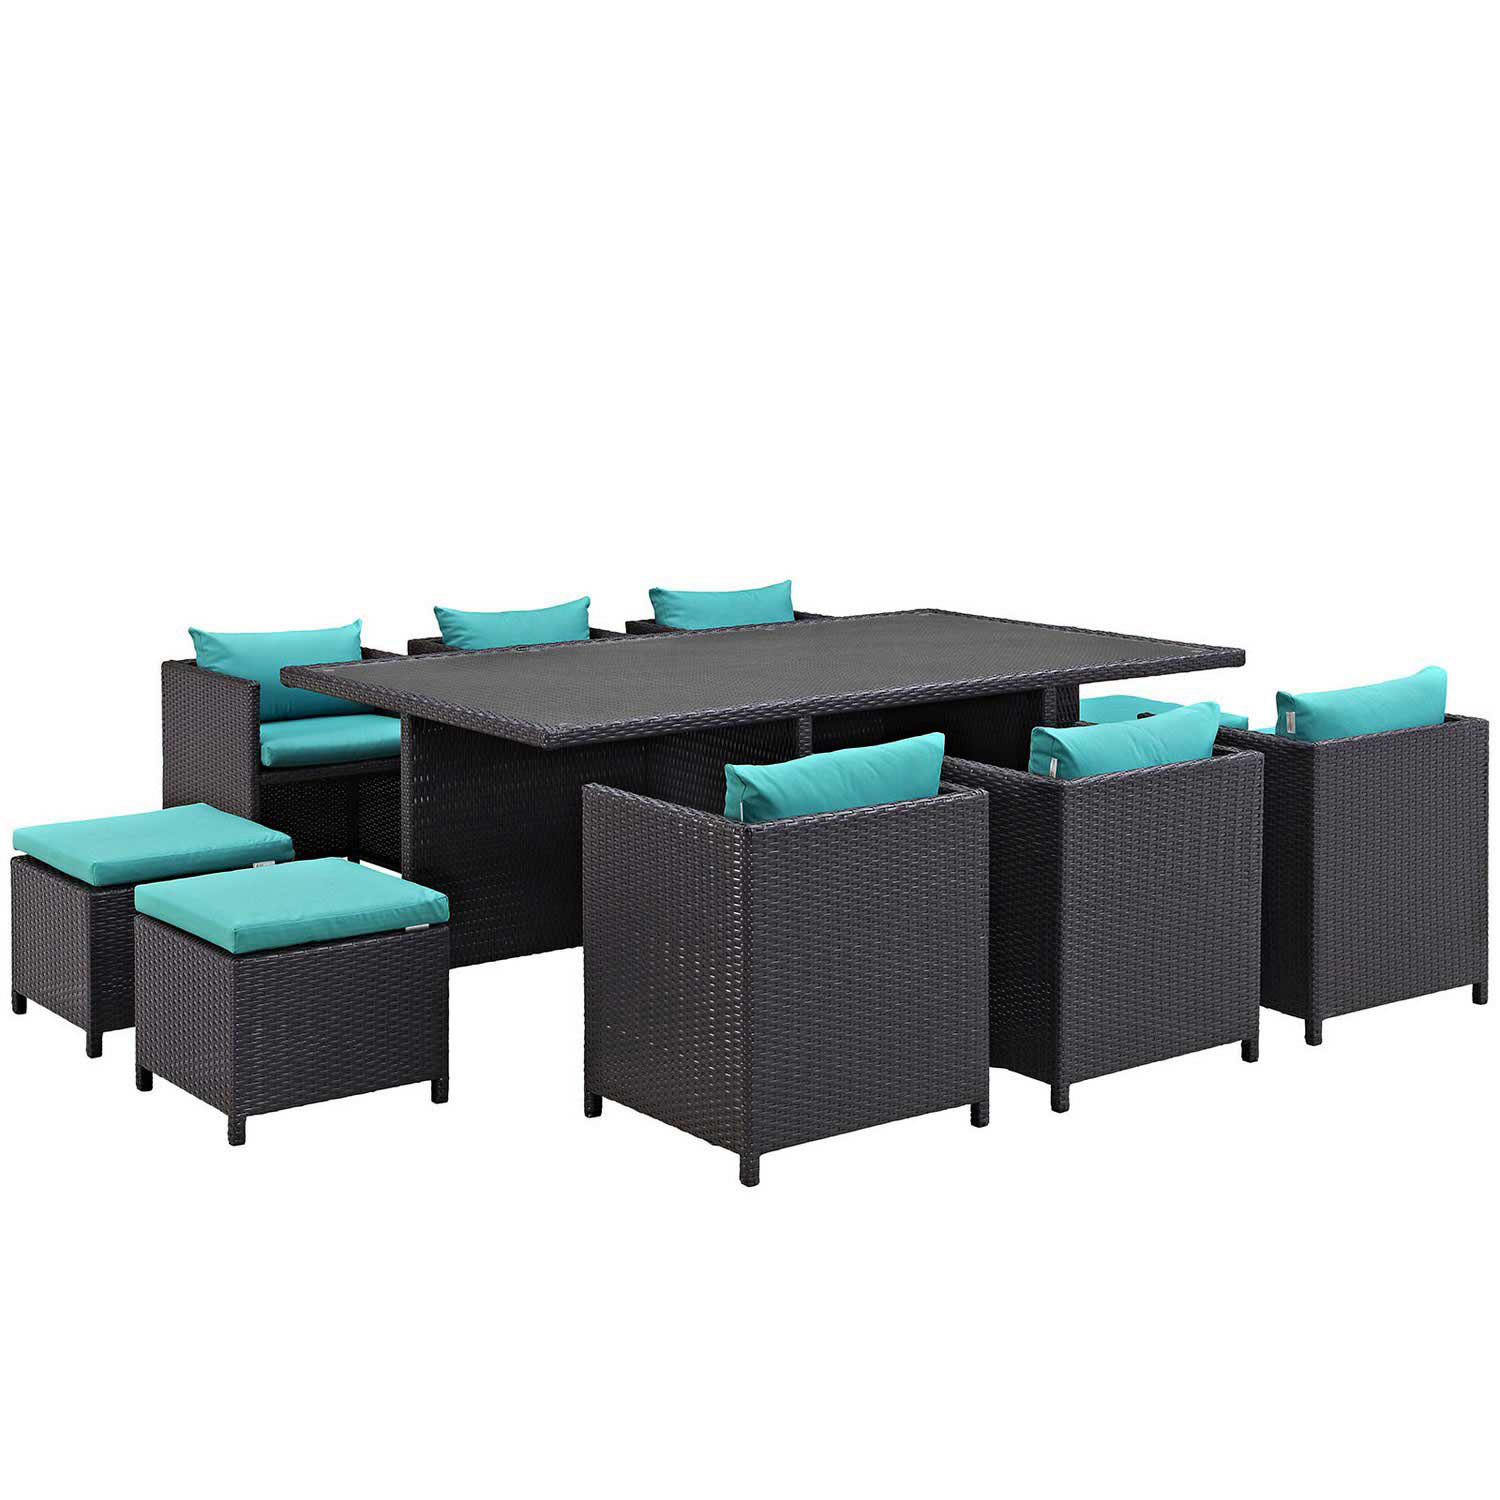 Modway Reversal 11 Piece Outdoor Patio Dining Set - Espresso Turquoise